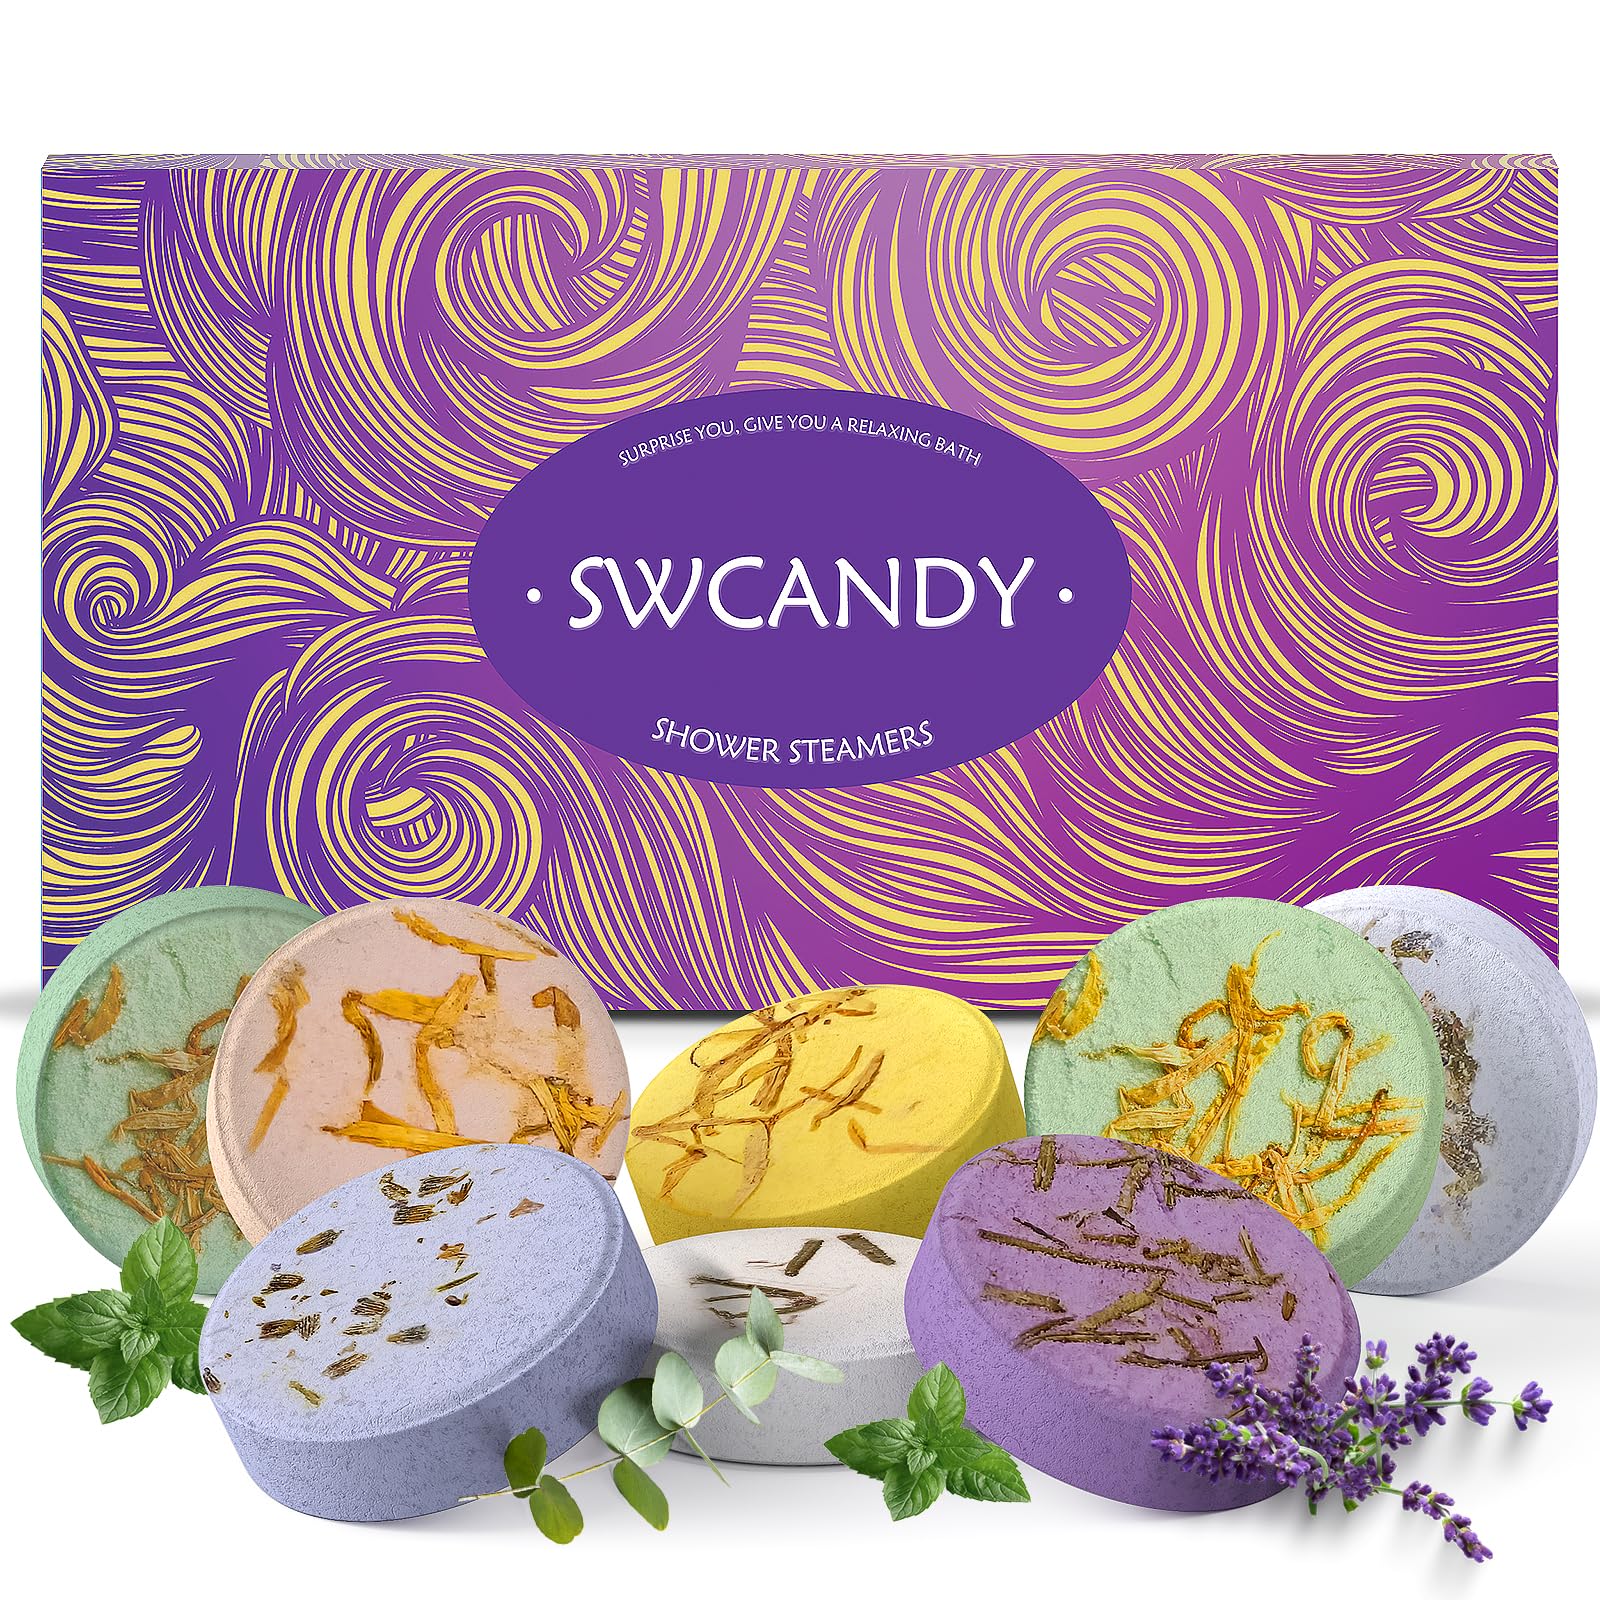 Aromatherapy Shower Steamers Birthday Day Gifts Lavender - Swcandy 8 Pcs Bath Bombs Birthday Gifts for Women, Shower Bombs with Essential Oils, Relaxation Home SPA for Women Who Has Everything